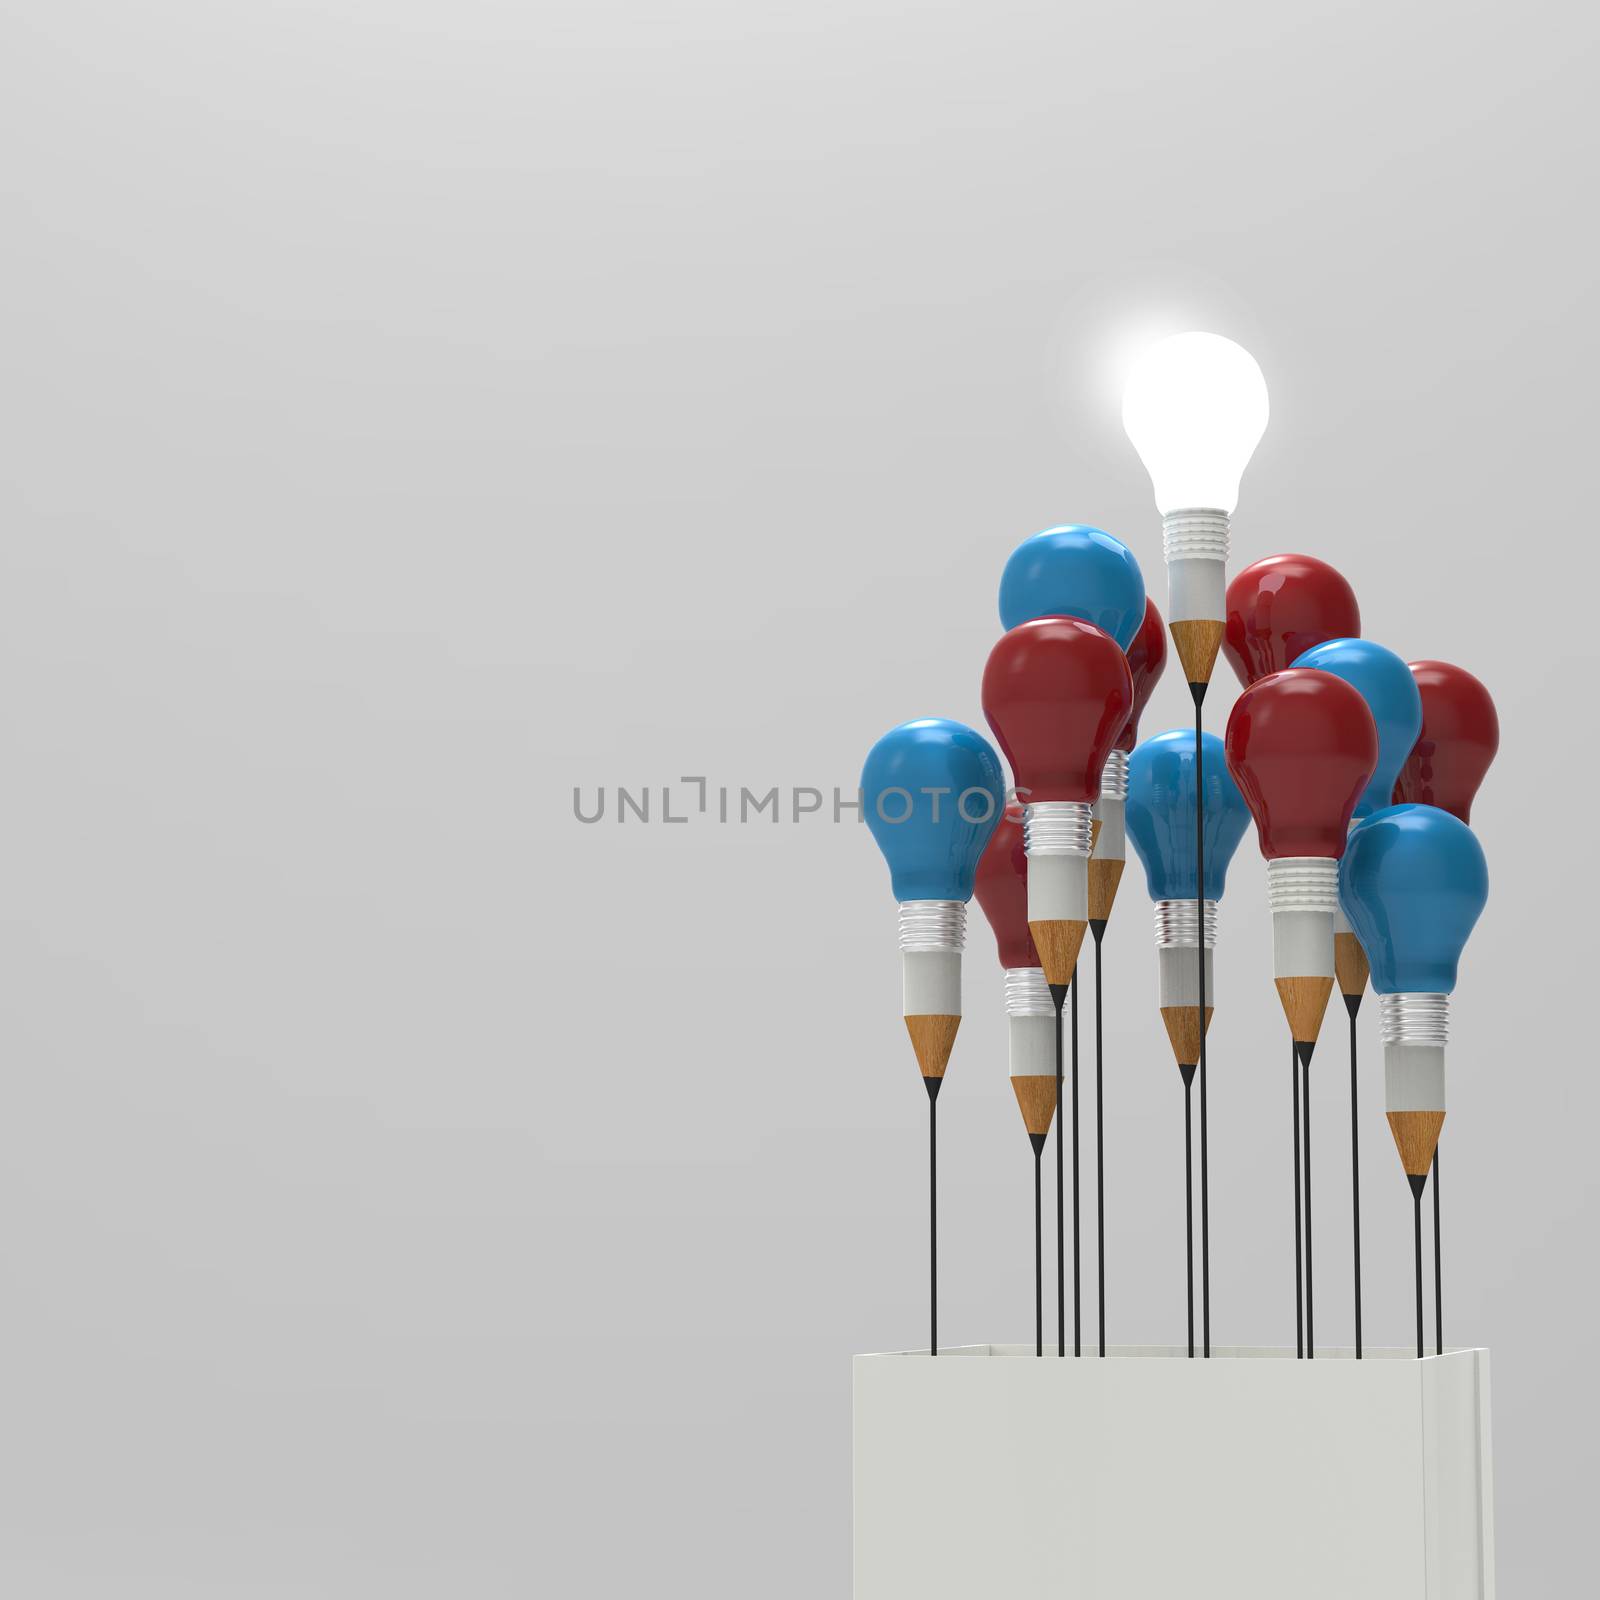 drawing idea pencil and light bulb concept outside the box as cr by everythingpossible